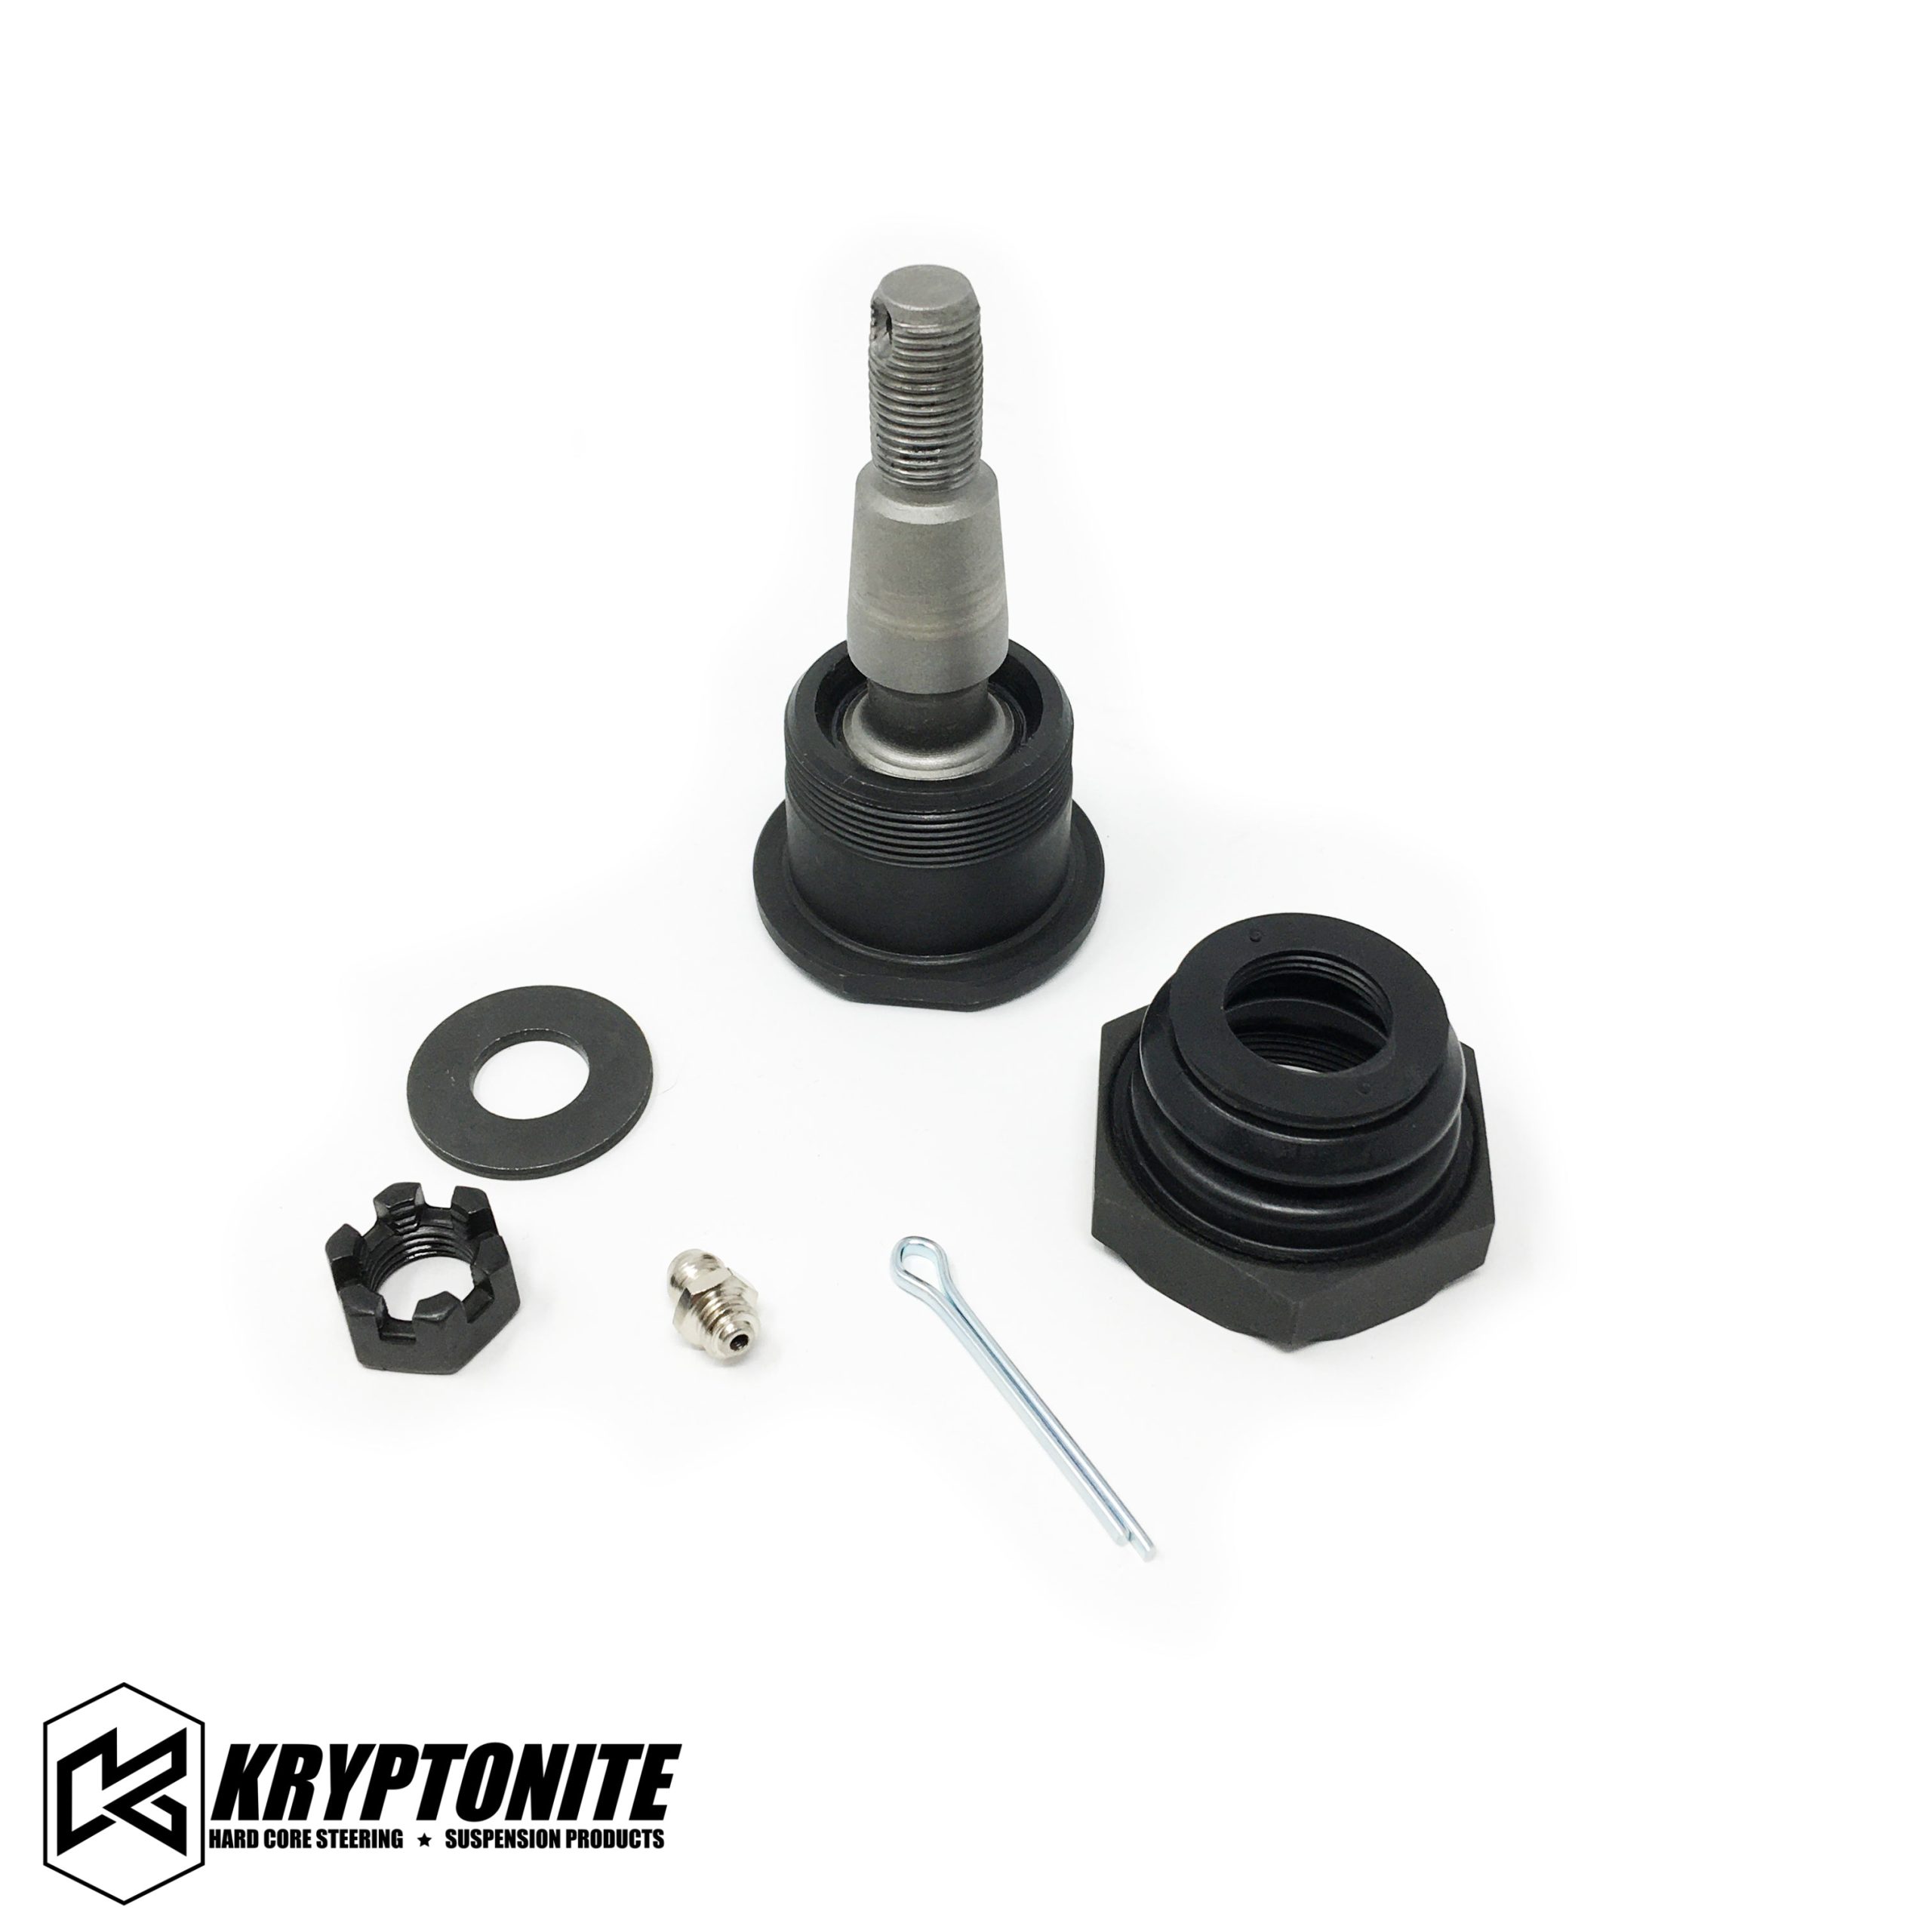 KRYPTONITE CAN-AM MAVERICK X3 DEATH GRIP BALL JOINT PACKAGE DEAL